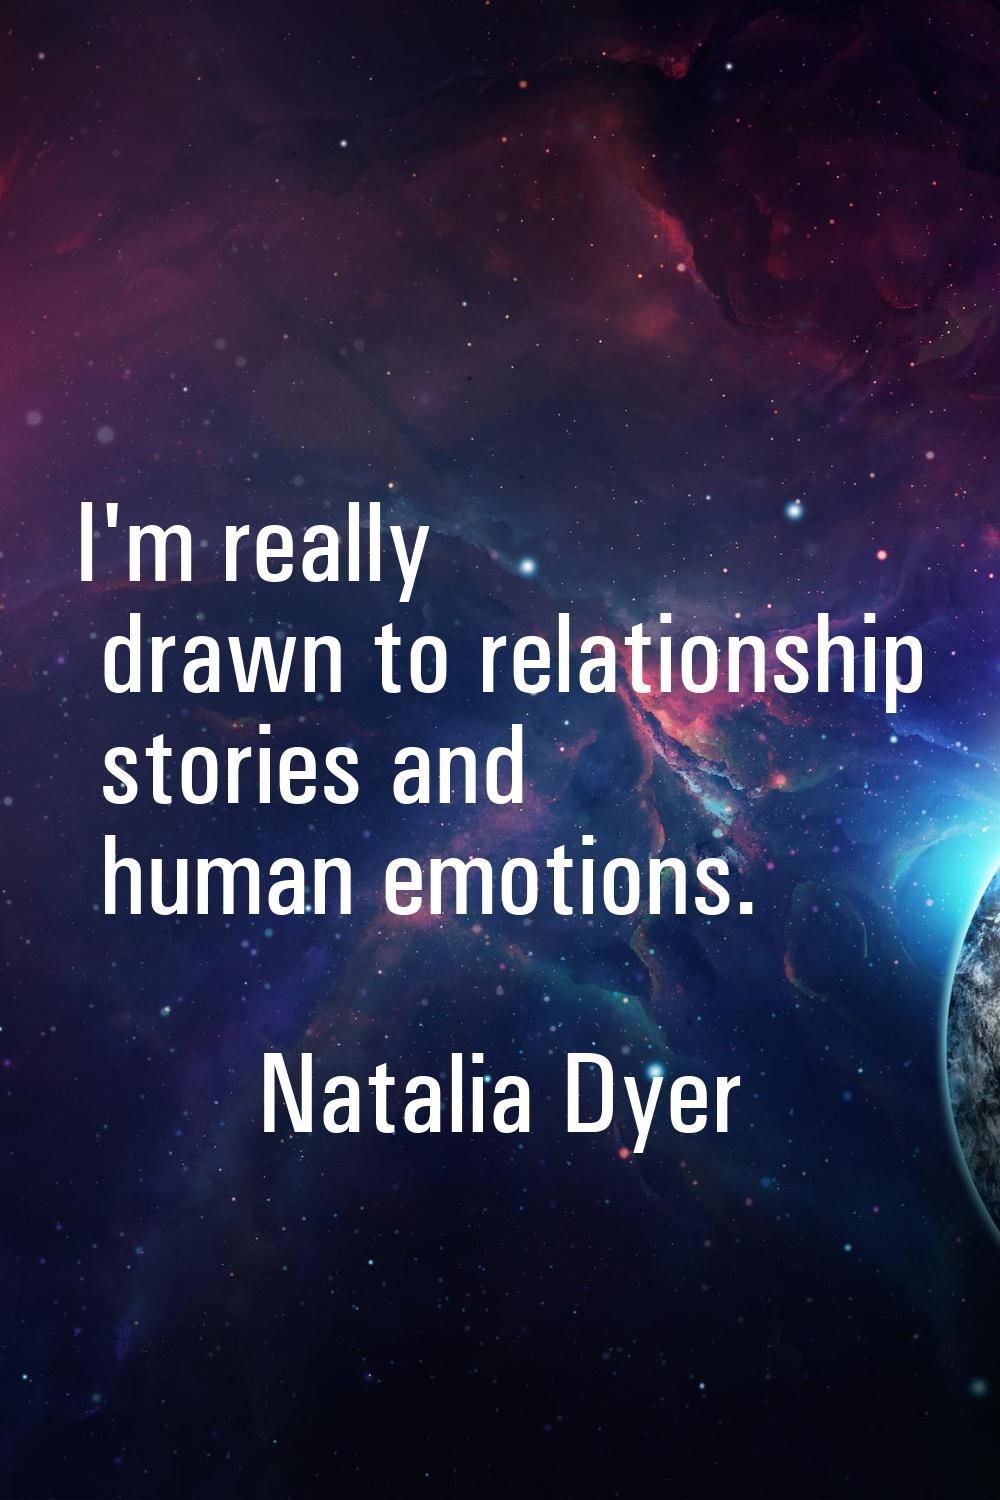 I'm really drawn to relationship stories and human emotions.